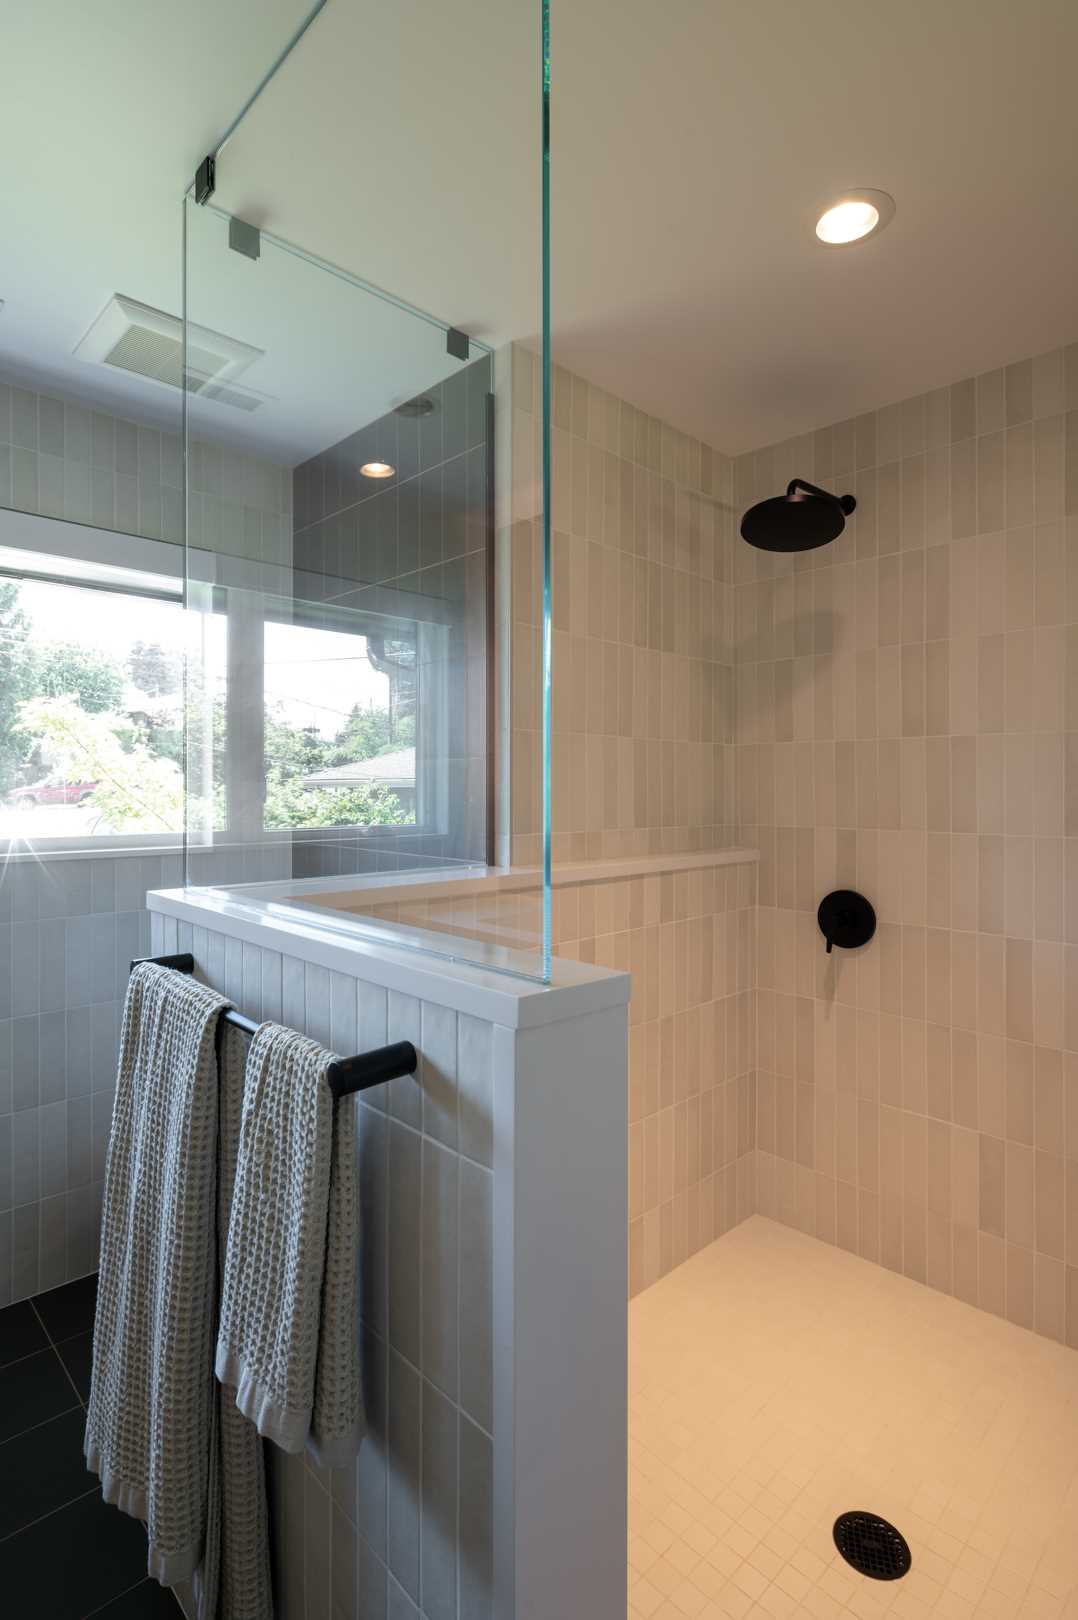 The updated primary bathroom received a changed layout, with the new double vanity located on the left wall, and the shower and toilet now located on the right. A glass shower screen allows the natural light from the window to flow through the space. Additional light has been added to the bathroom in the form of hidden LEDs behind the mirror.